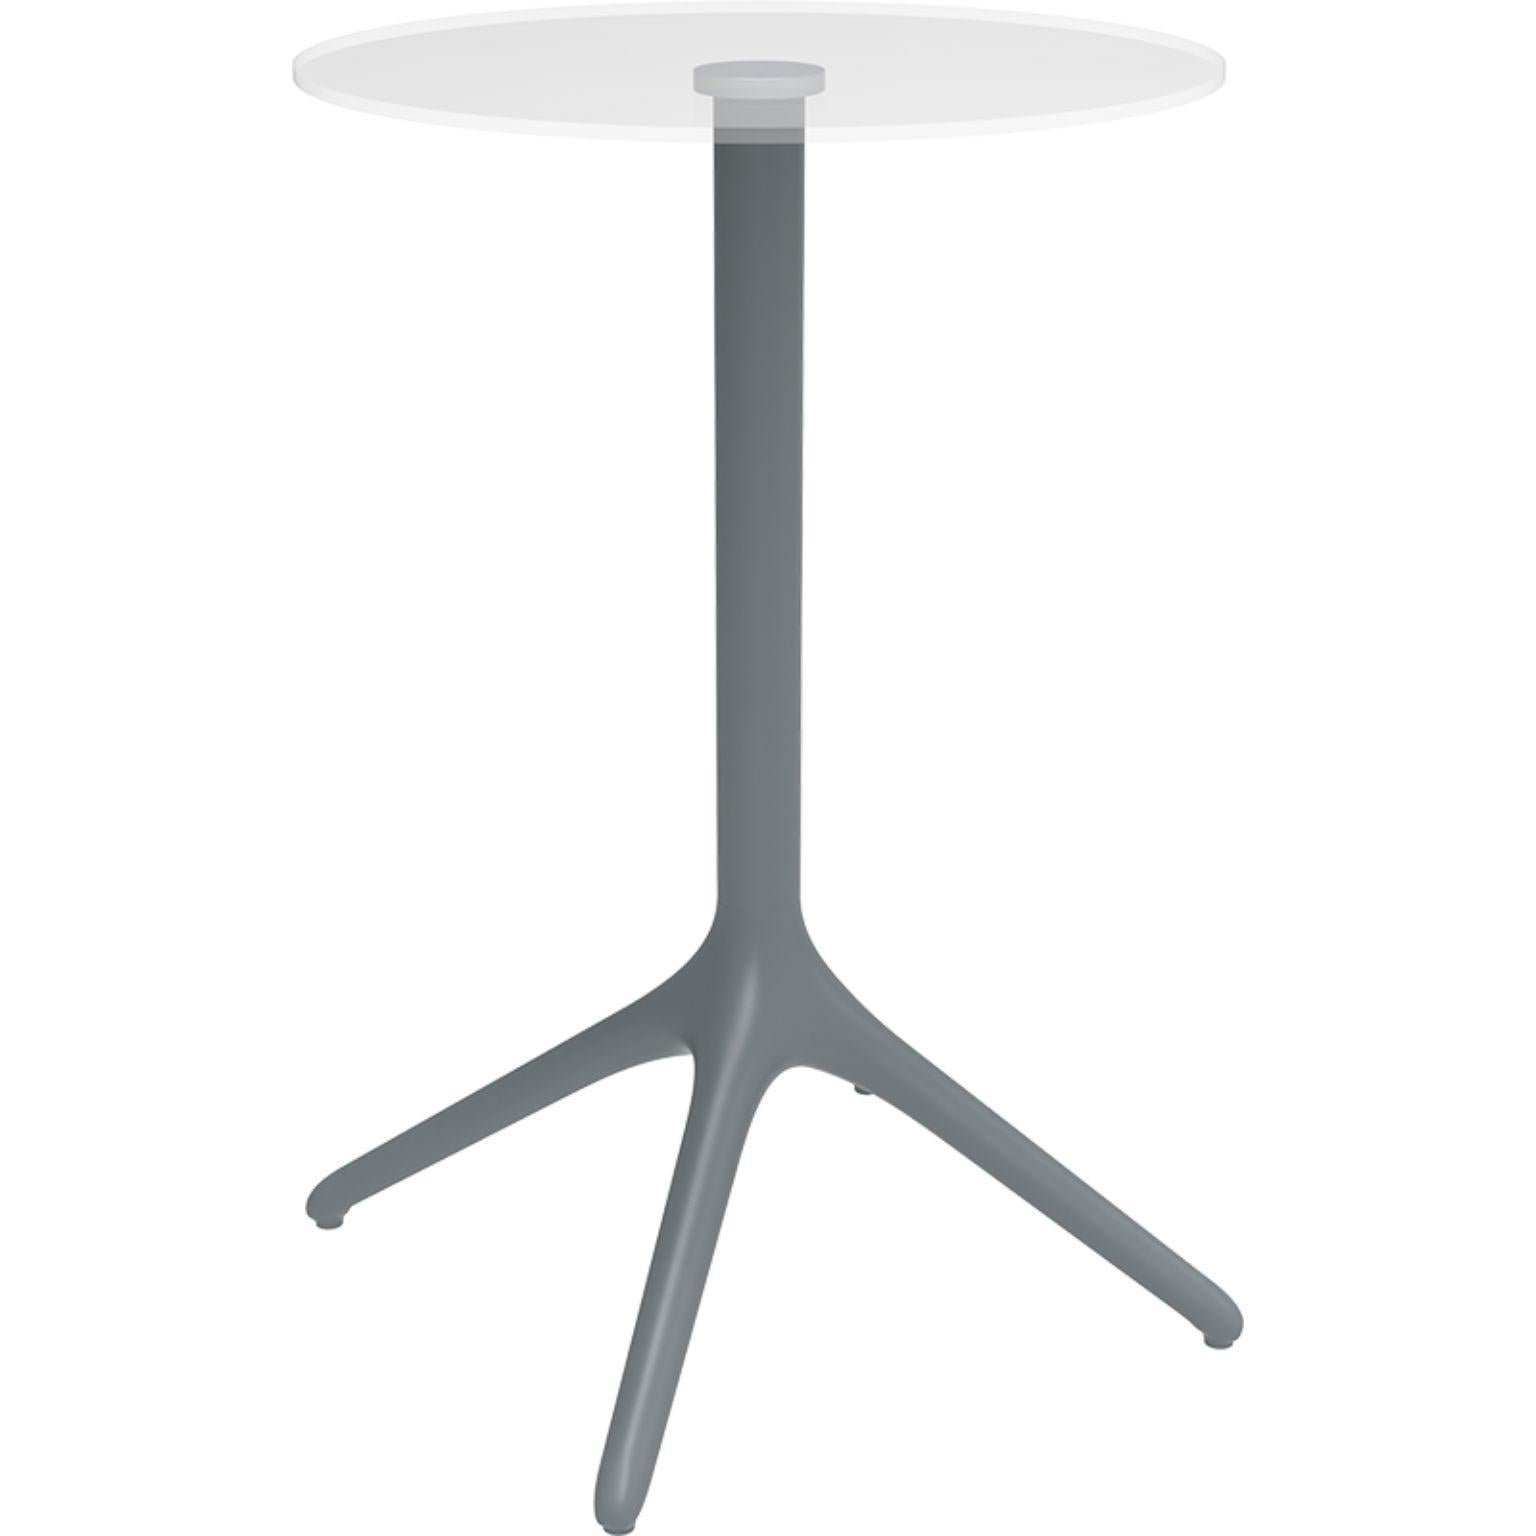 Uni grey table XL 105 by MOWEE
Dimensions: D 50 x H 105 cm
Material: Aluminium, tempered glass
Weight: 9.7 kg
Also available in different colours and finishes.

A table designed to be as versatile as possible and can coexist with a variety of